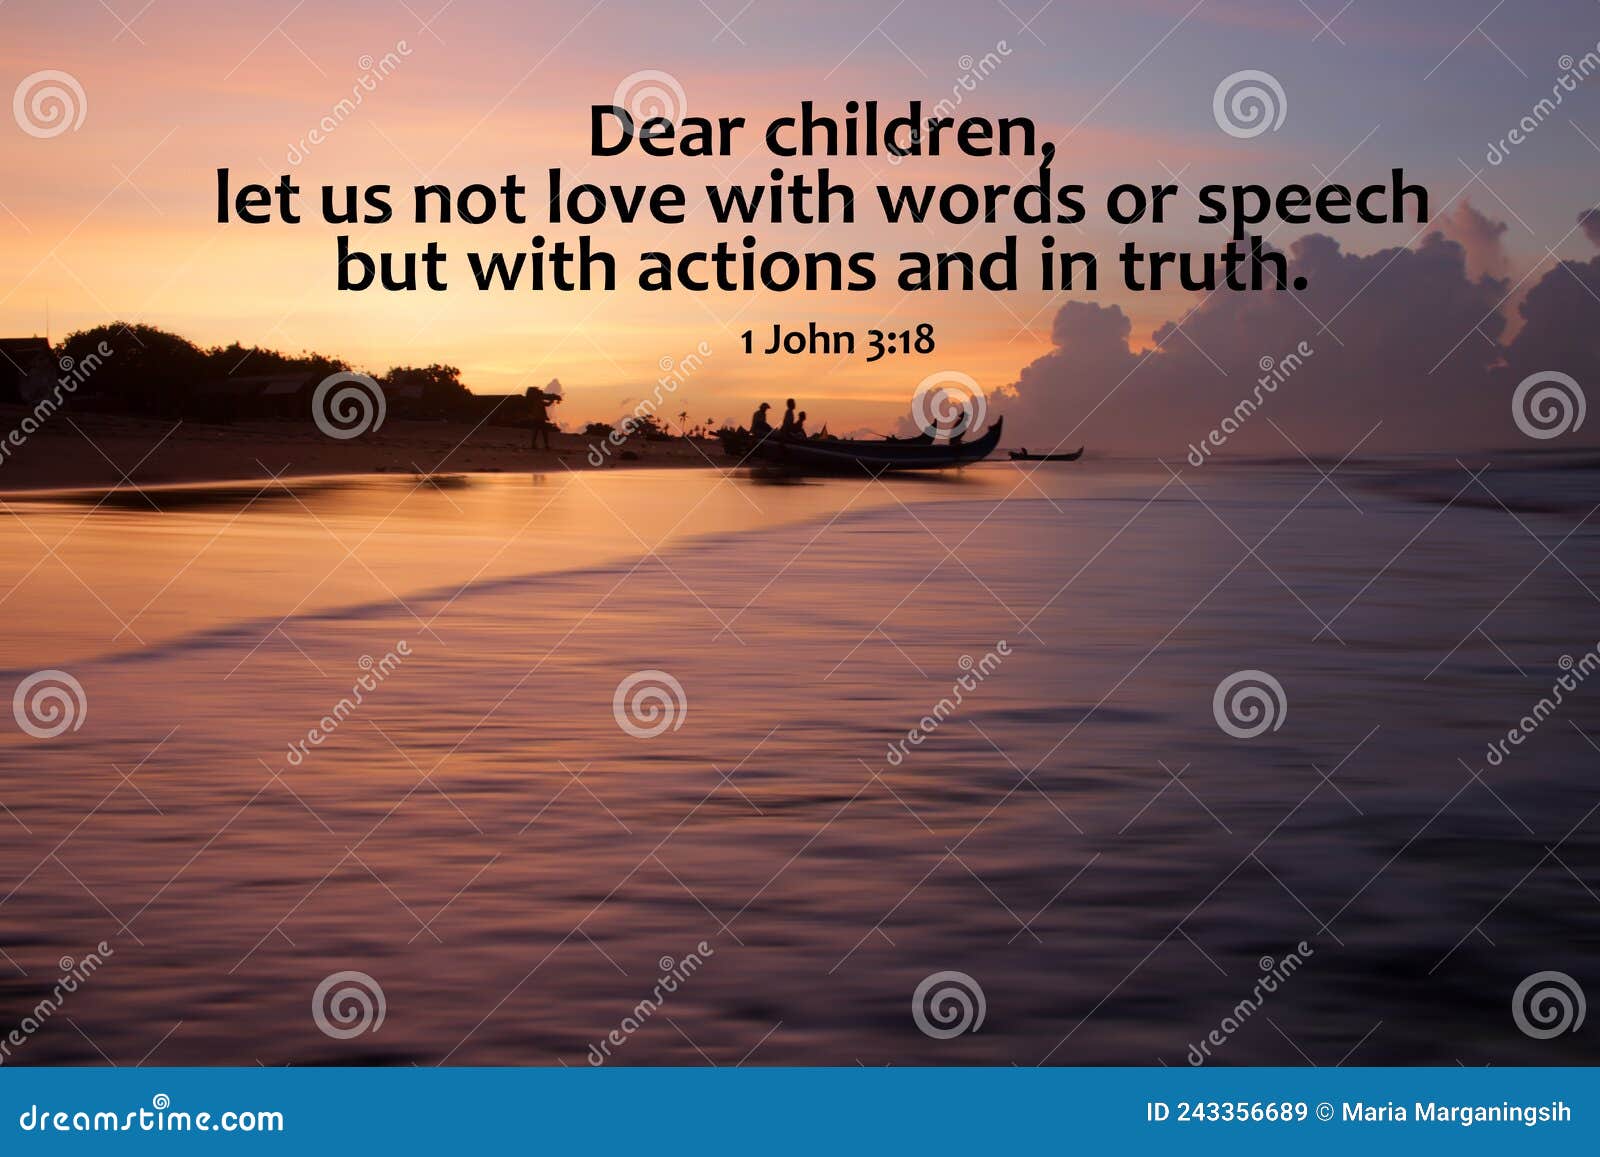 bible verse quote - dear children, let us not love with words or speech but with actions and in truth. 1 john 3:18 on beach view.